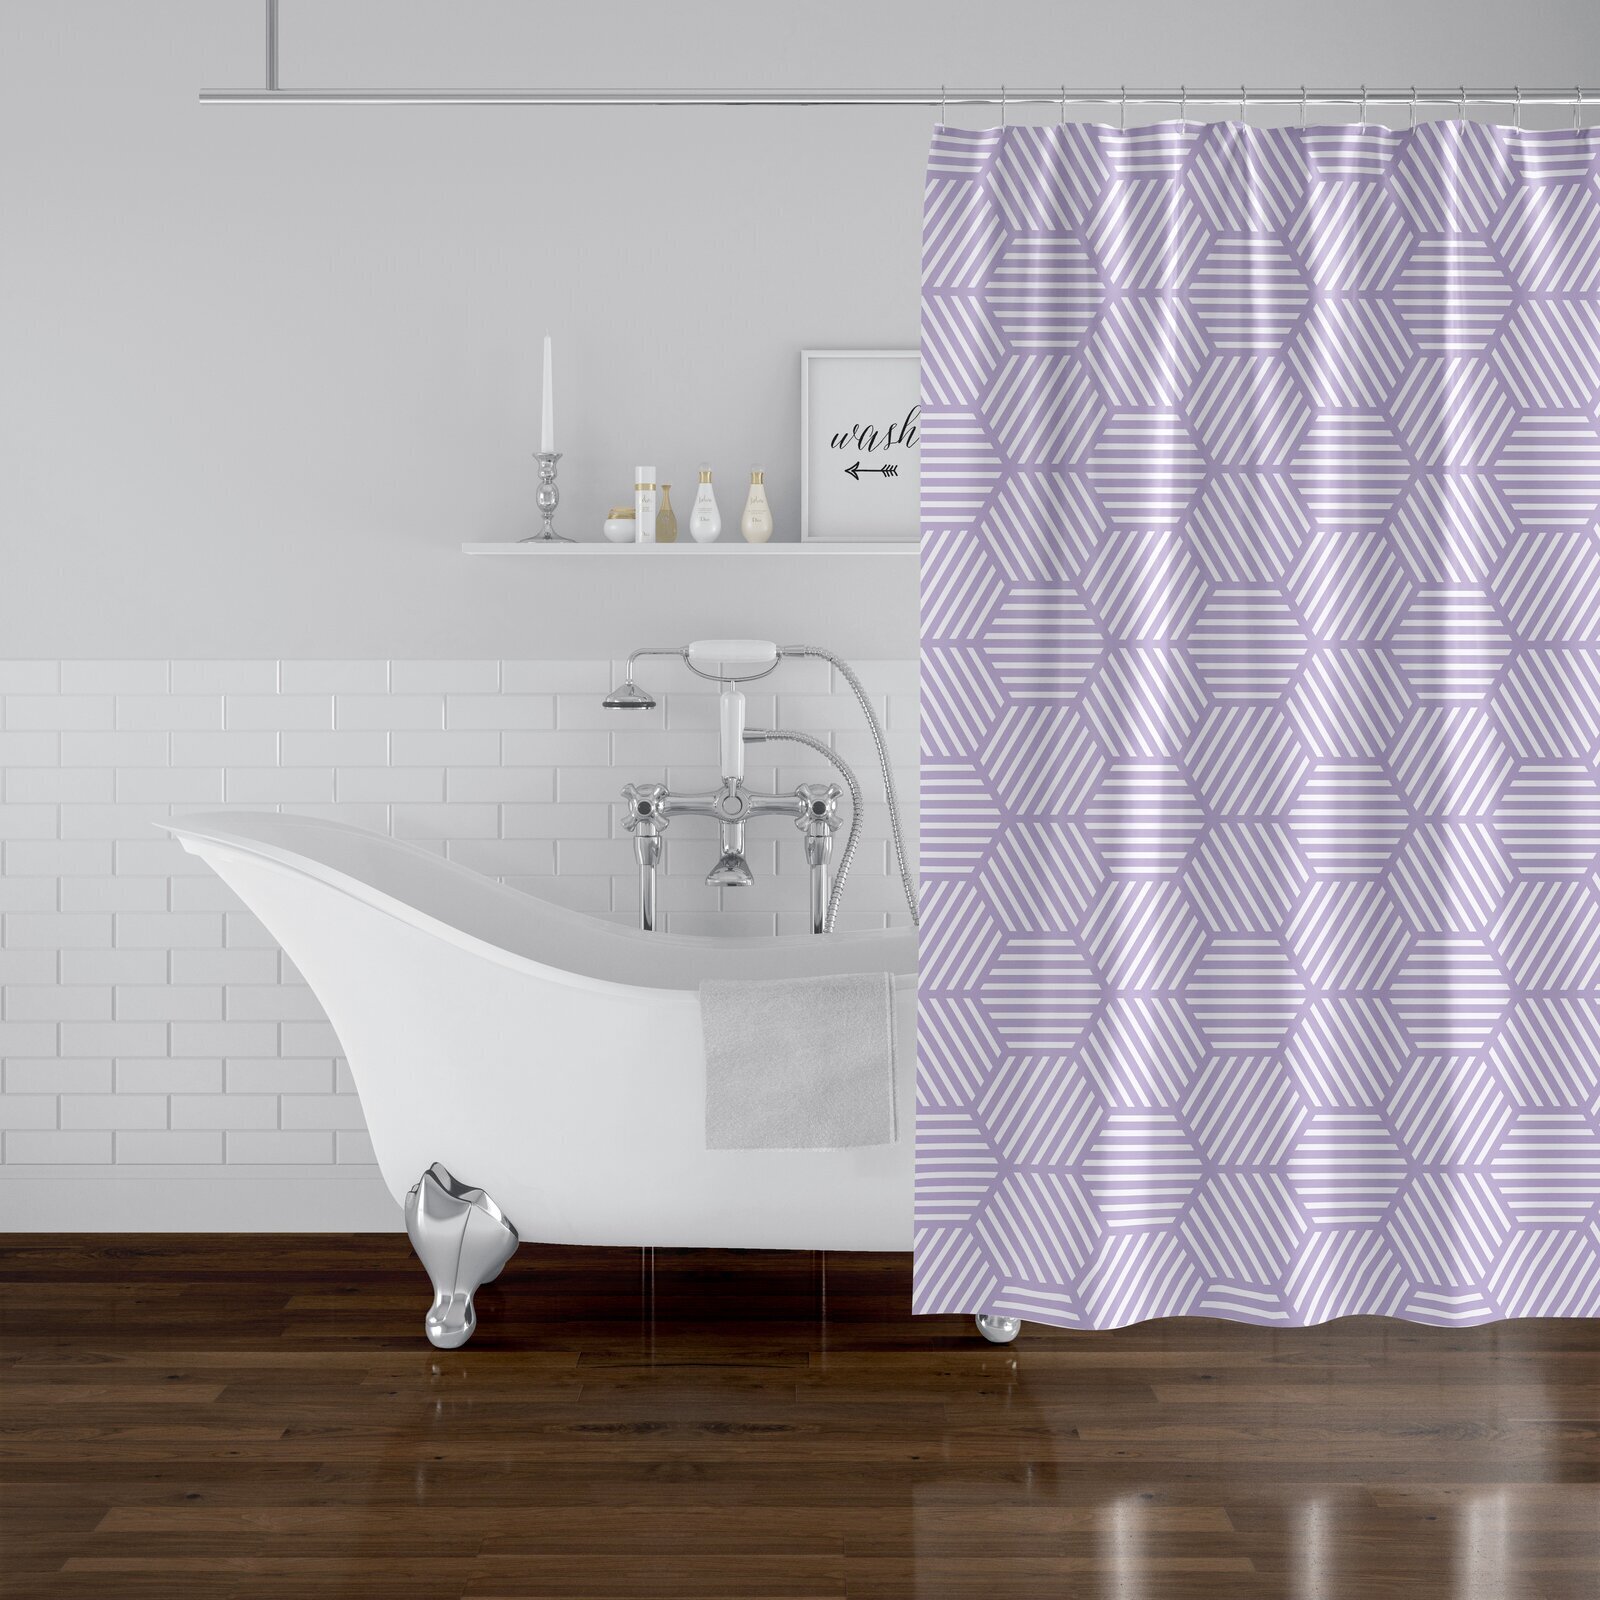 Tall Shower Curtain with Geometric Pattern